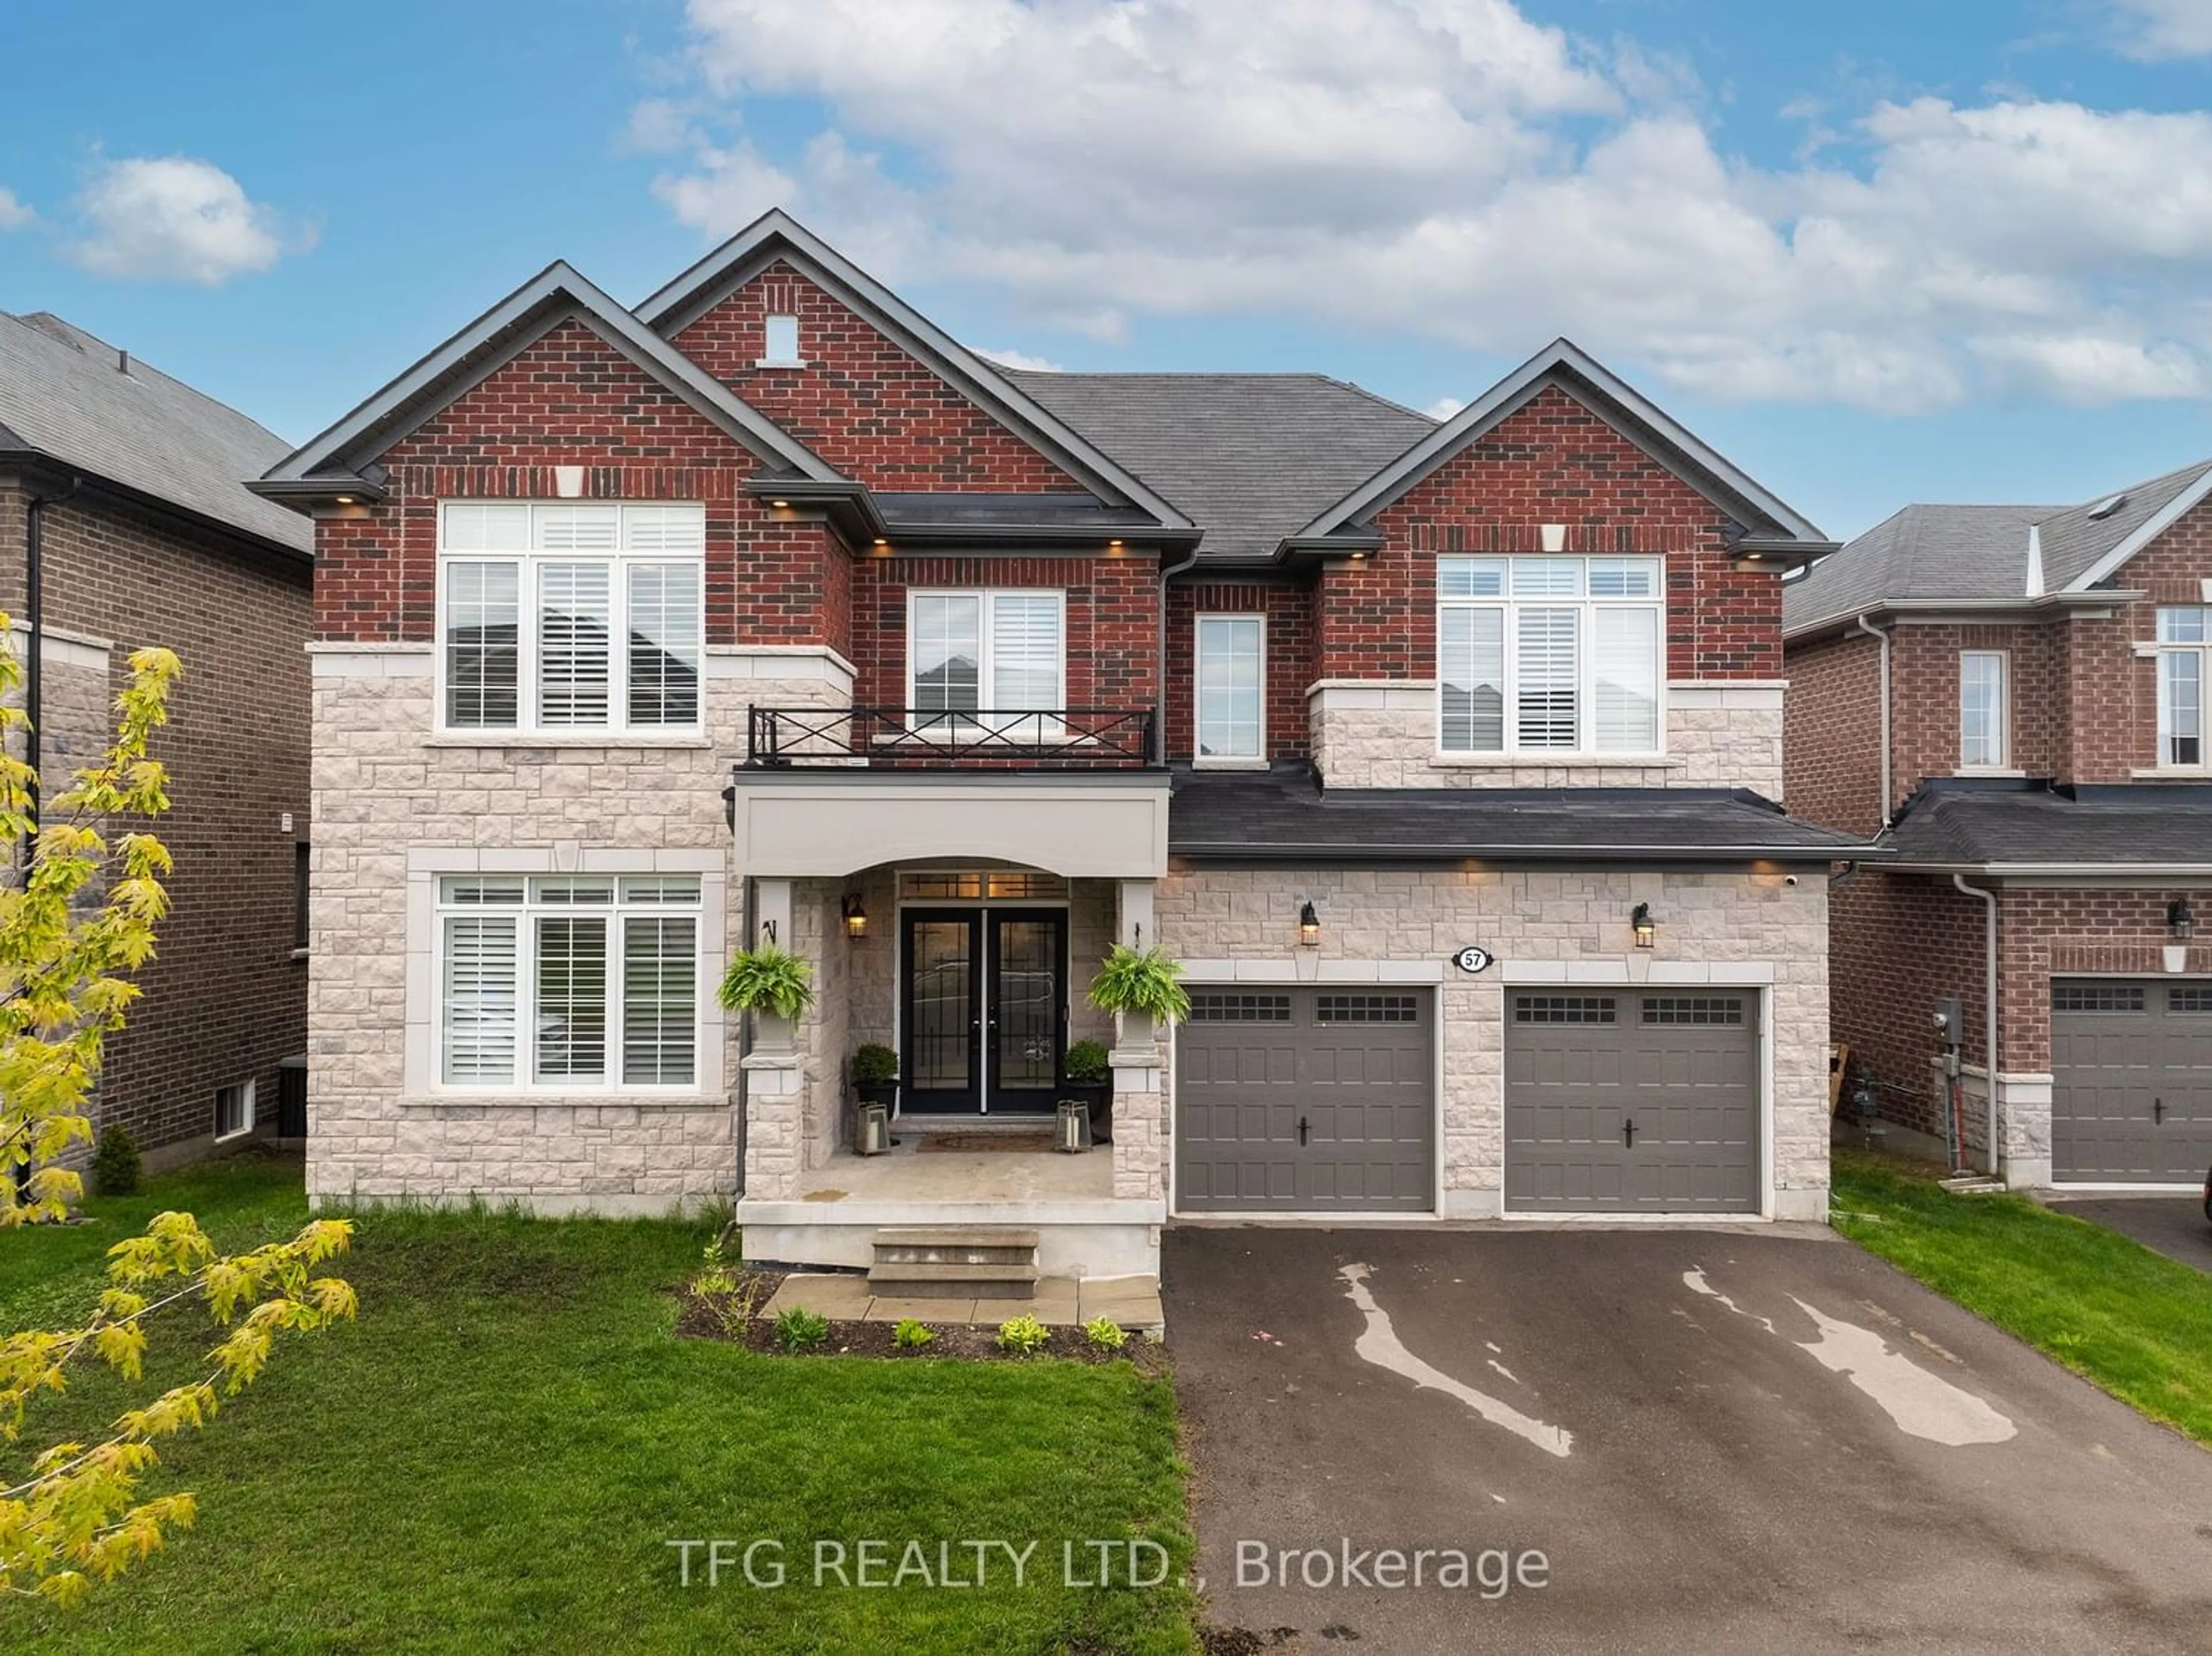 Home with brick exterior material for 57 Highlands Blvd, Cavan Monaghan Ontario L0A 1G0